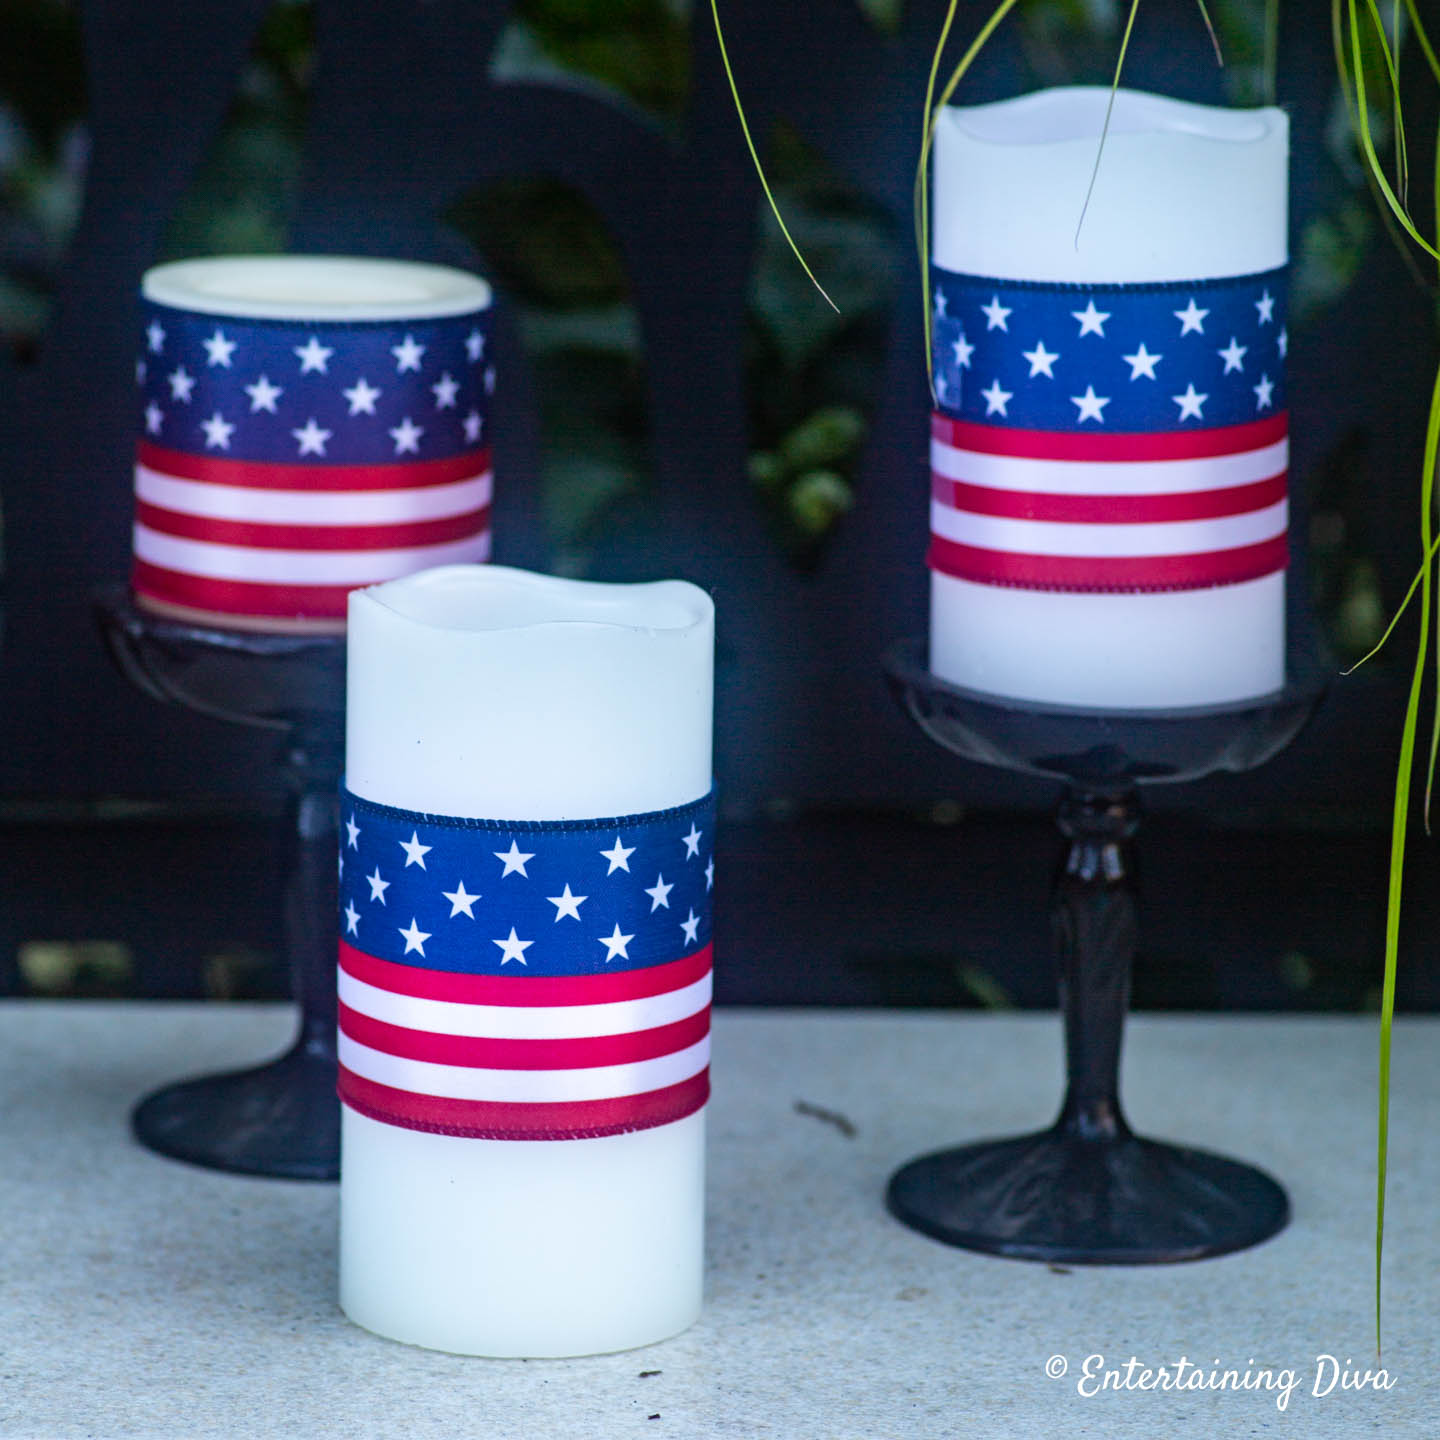 Red, white and blue ribbons wrapped around pillar candles for the 4th of July